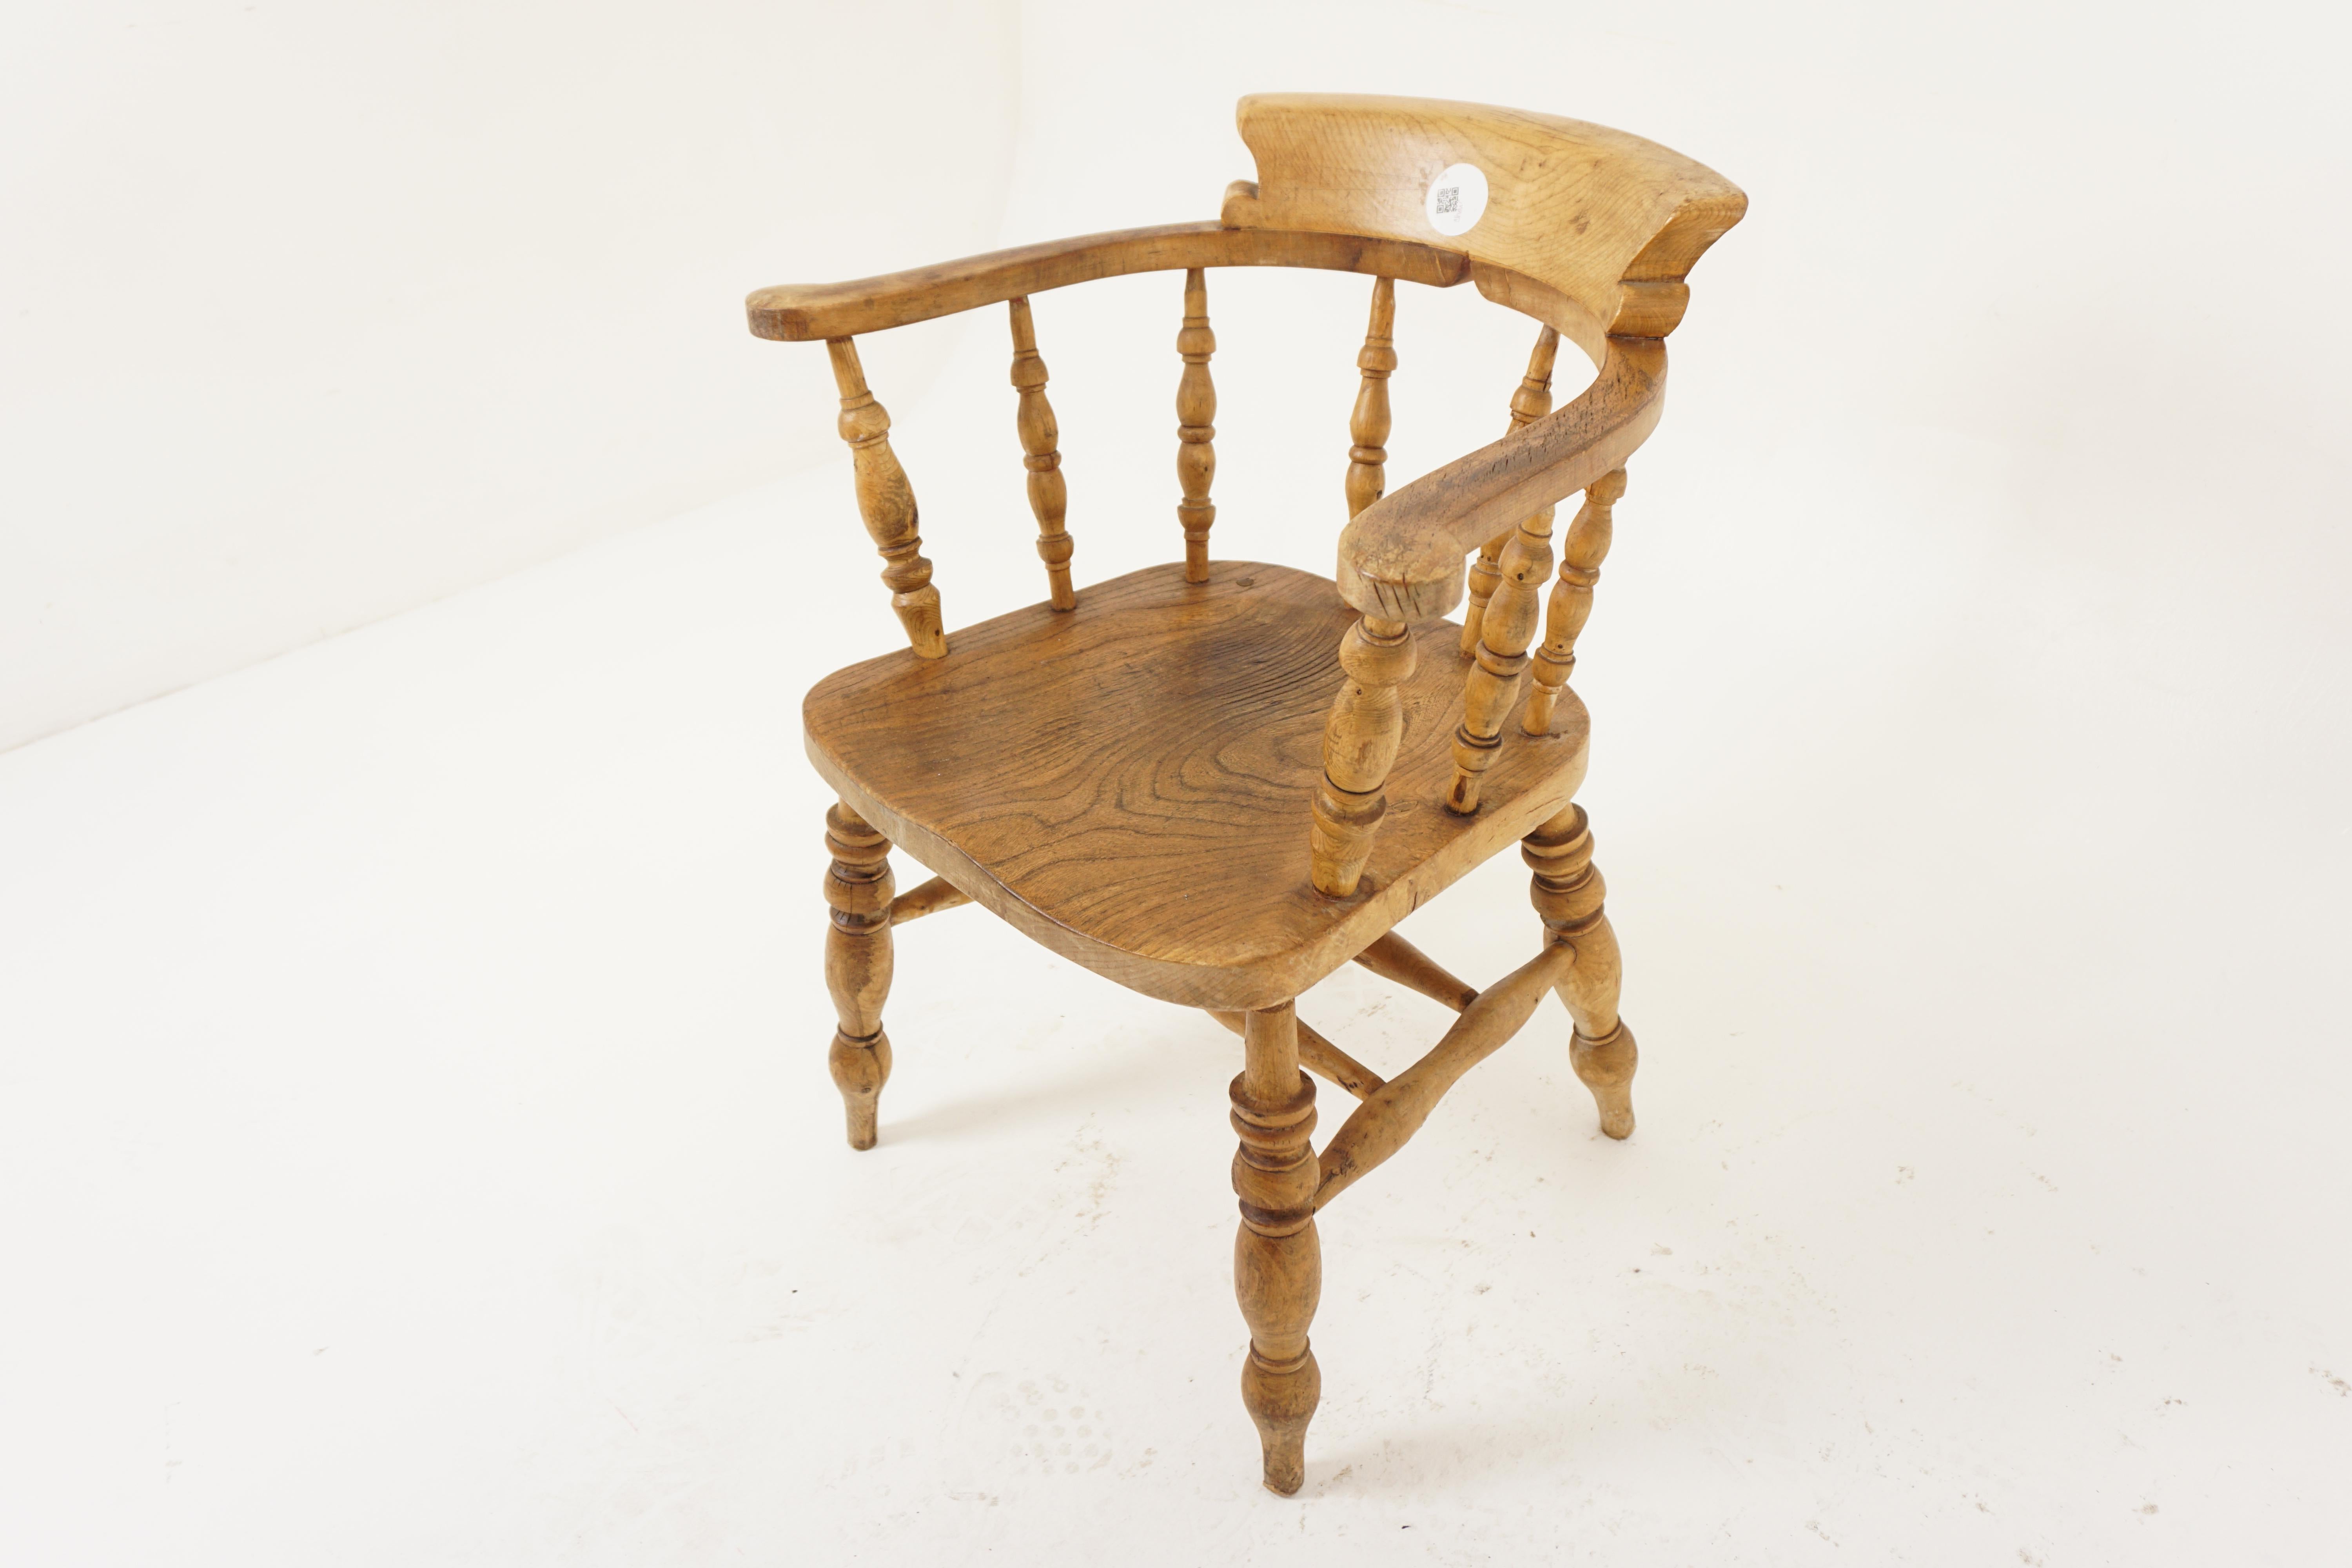 Antique Beech & Elm Chair, Victorian Smokers Bow Office Chair, Desk Chair, Antique Furniture, Scotland 1870, H1147

+ Scotland 1870
+ Solid Beech and Elm 
+ Original Finish
+ The chair has an attractive curving with a thick top rail
+ Ring